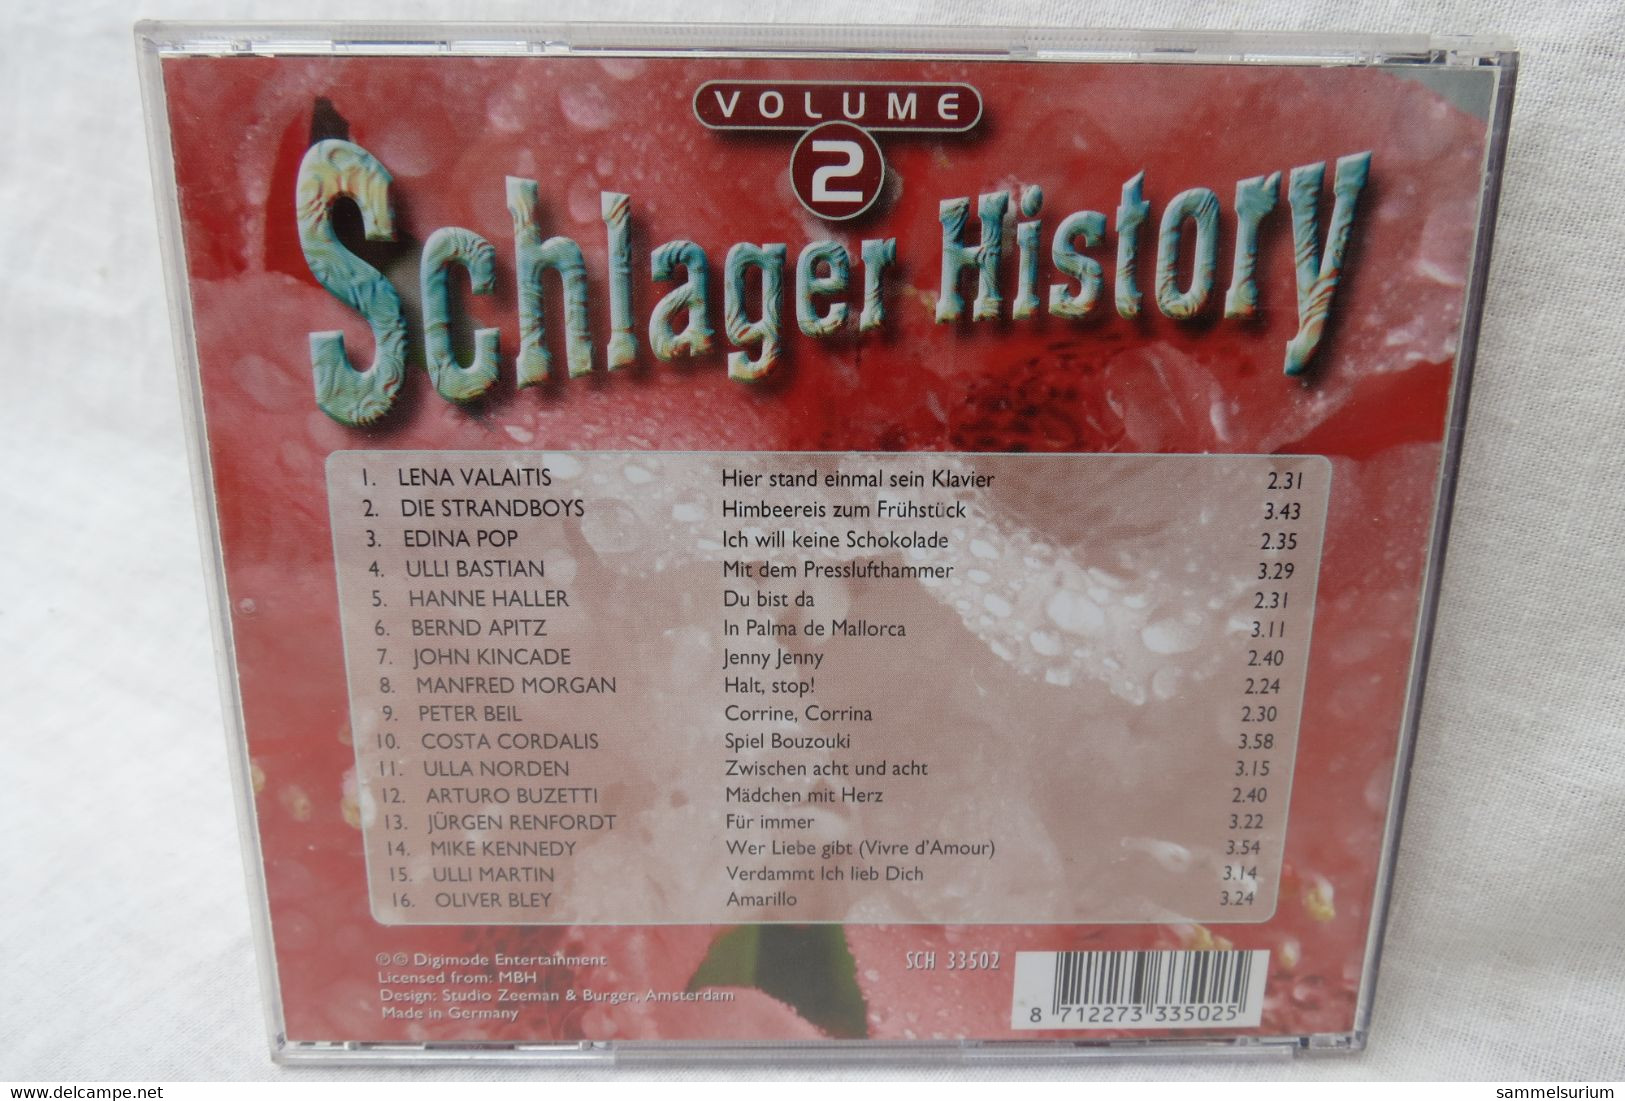 CD "Schlager History" Volume 2 - Hit-Compilations